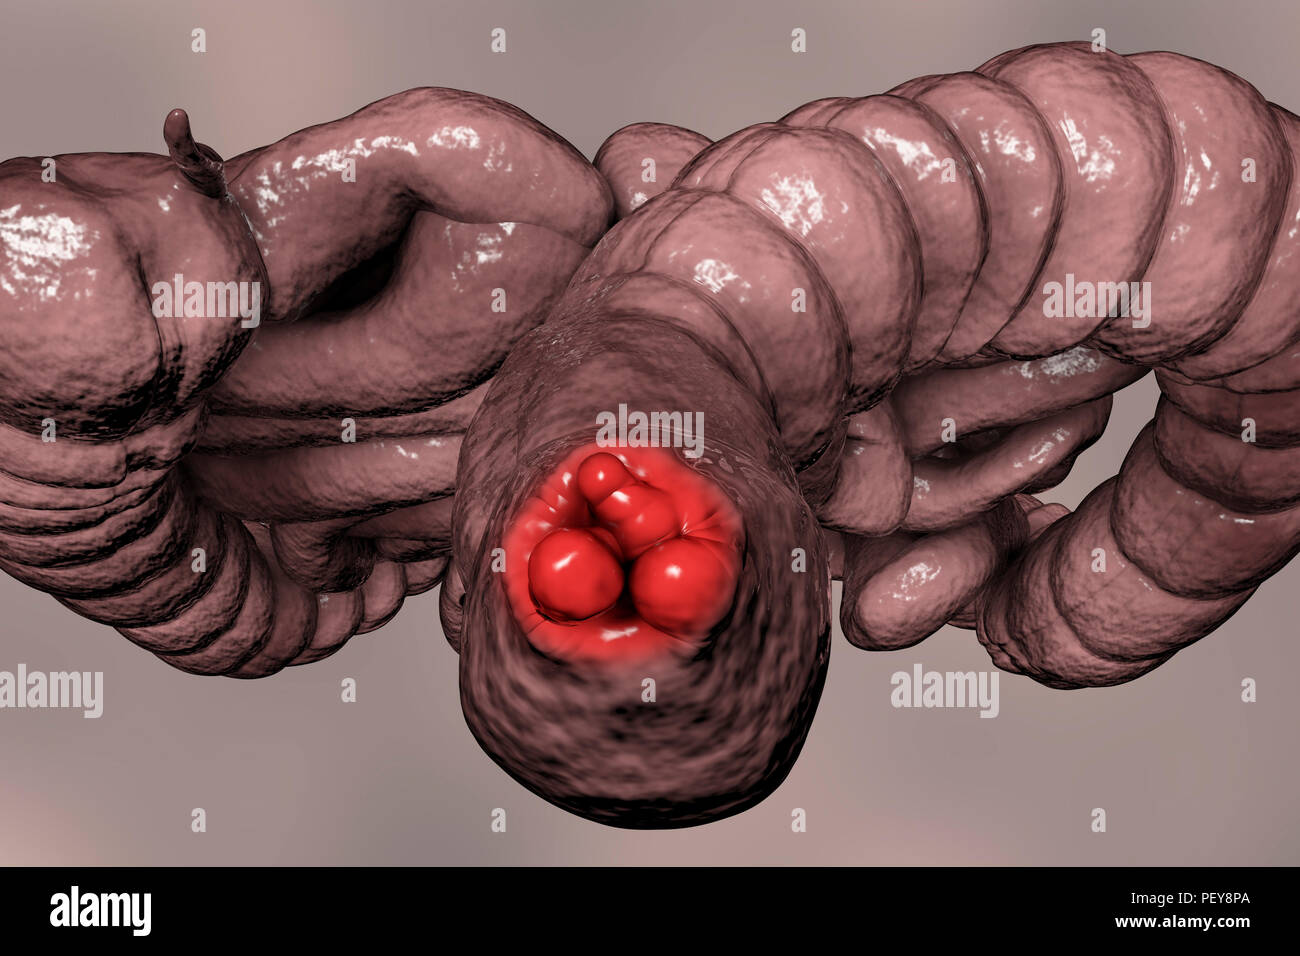 Haemorrhoids. Computer illustration of human intestines from below with haemorrhoids in the anus. Stock Photo